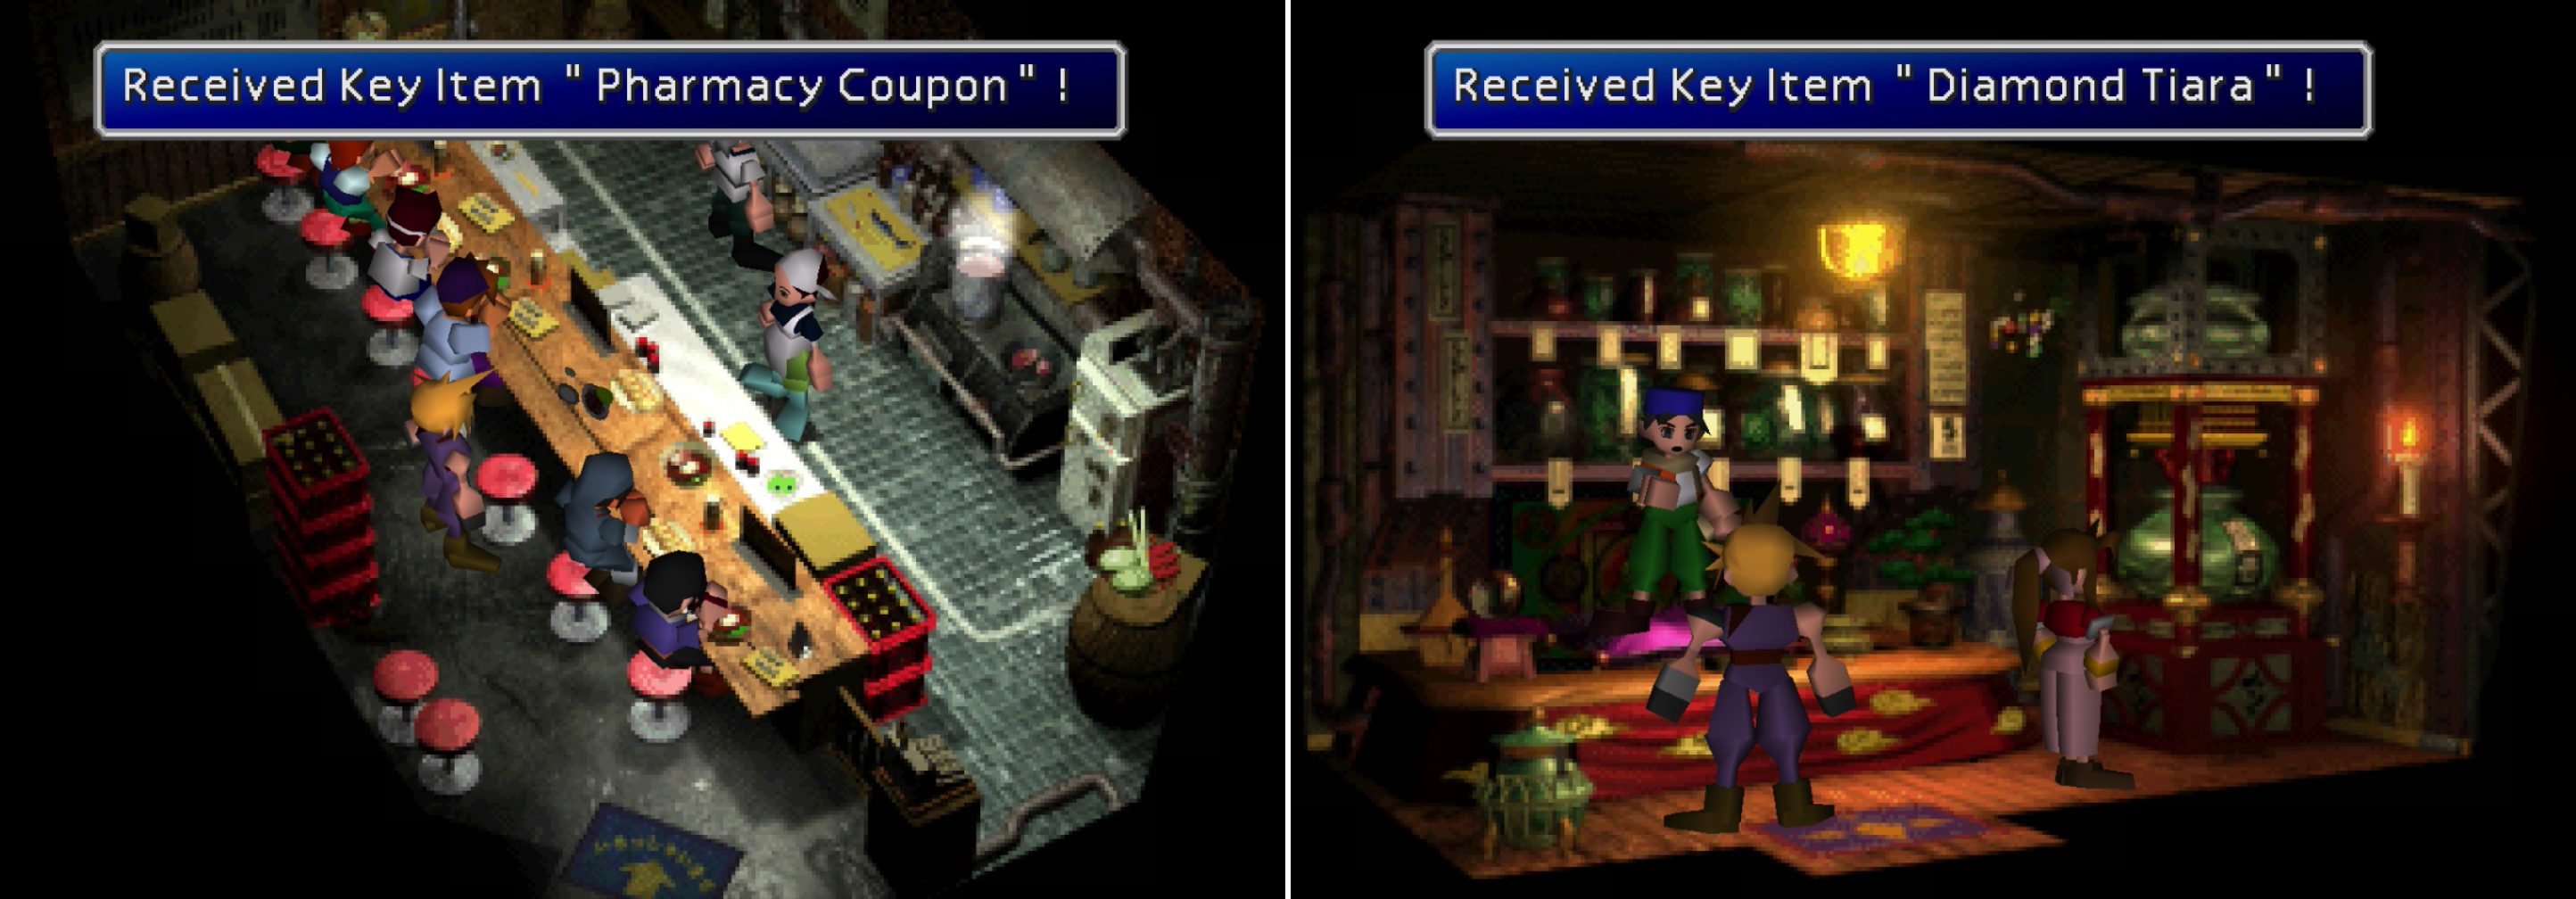 Buy a meal at the restaurant to get a Pharmacy Coupon, which can be traded for some useful medicine (left). Depending on what you purchase from the inns vending machine, the owner of the Materia shop will give you a tiara (right).